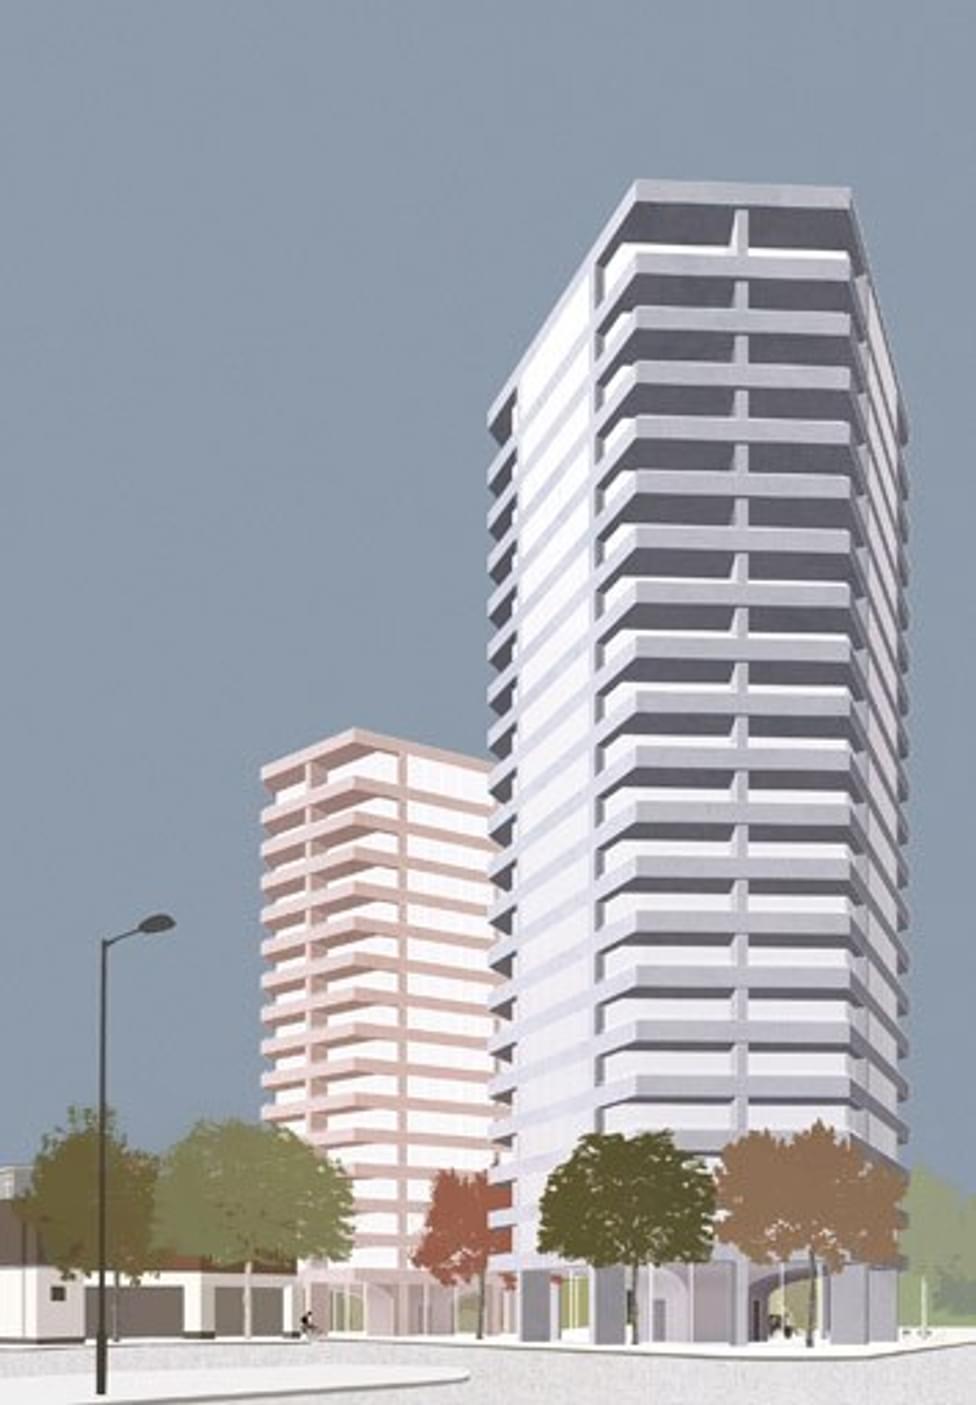 Colville-towers-355-x-511